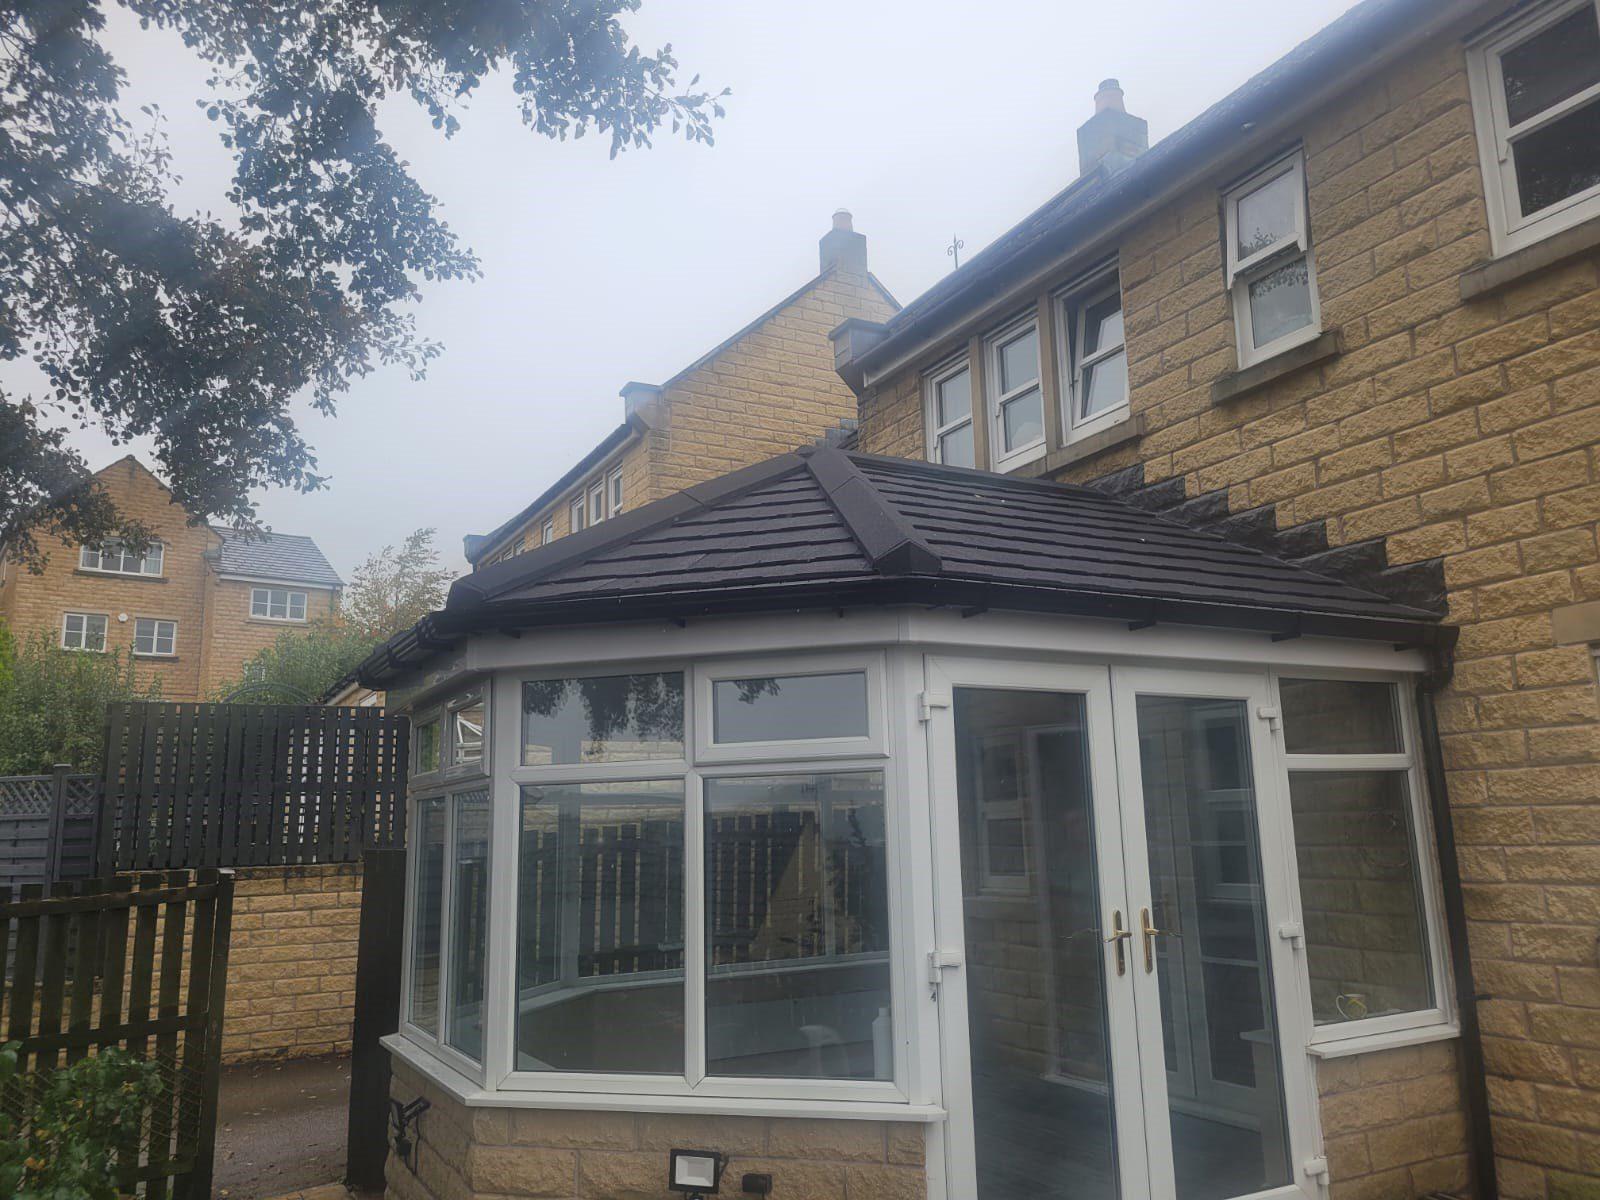 The Benefits of Solid Roof Conservatories: A Guide by CRS, Conservatory Roof Specialists